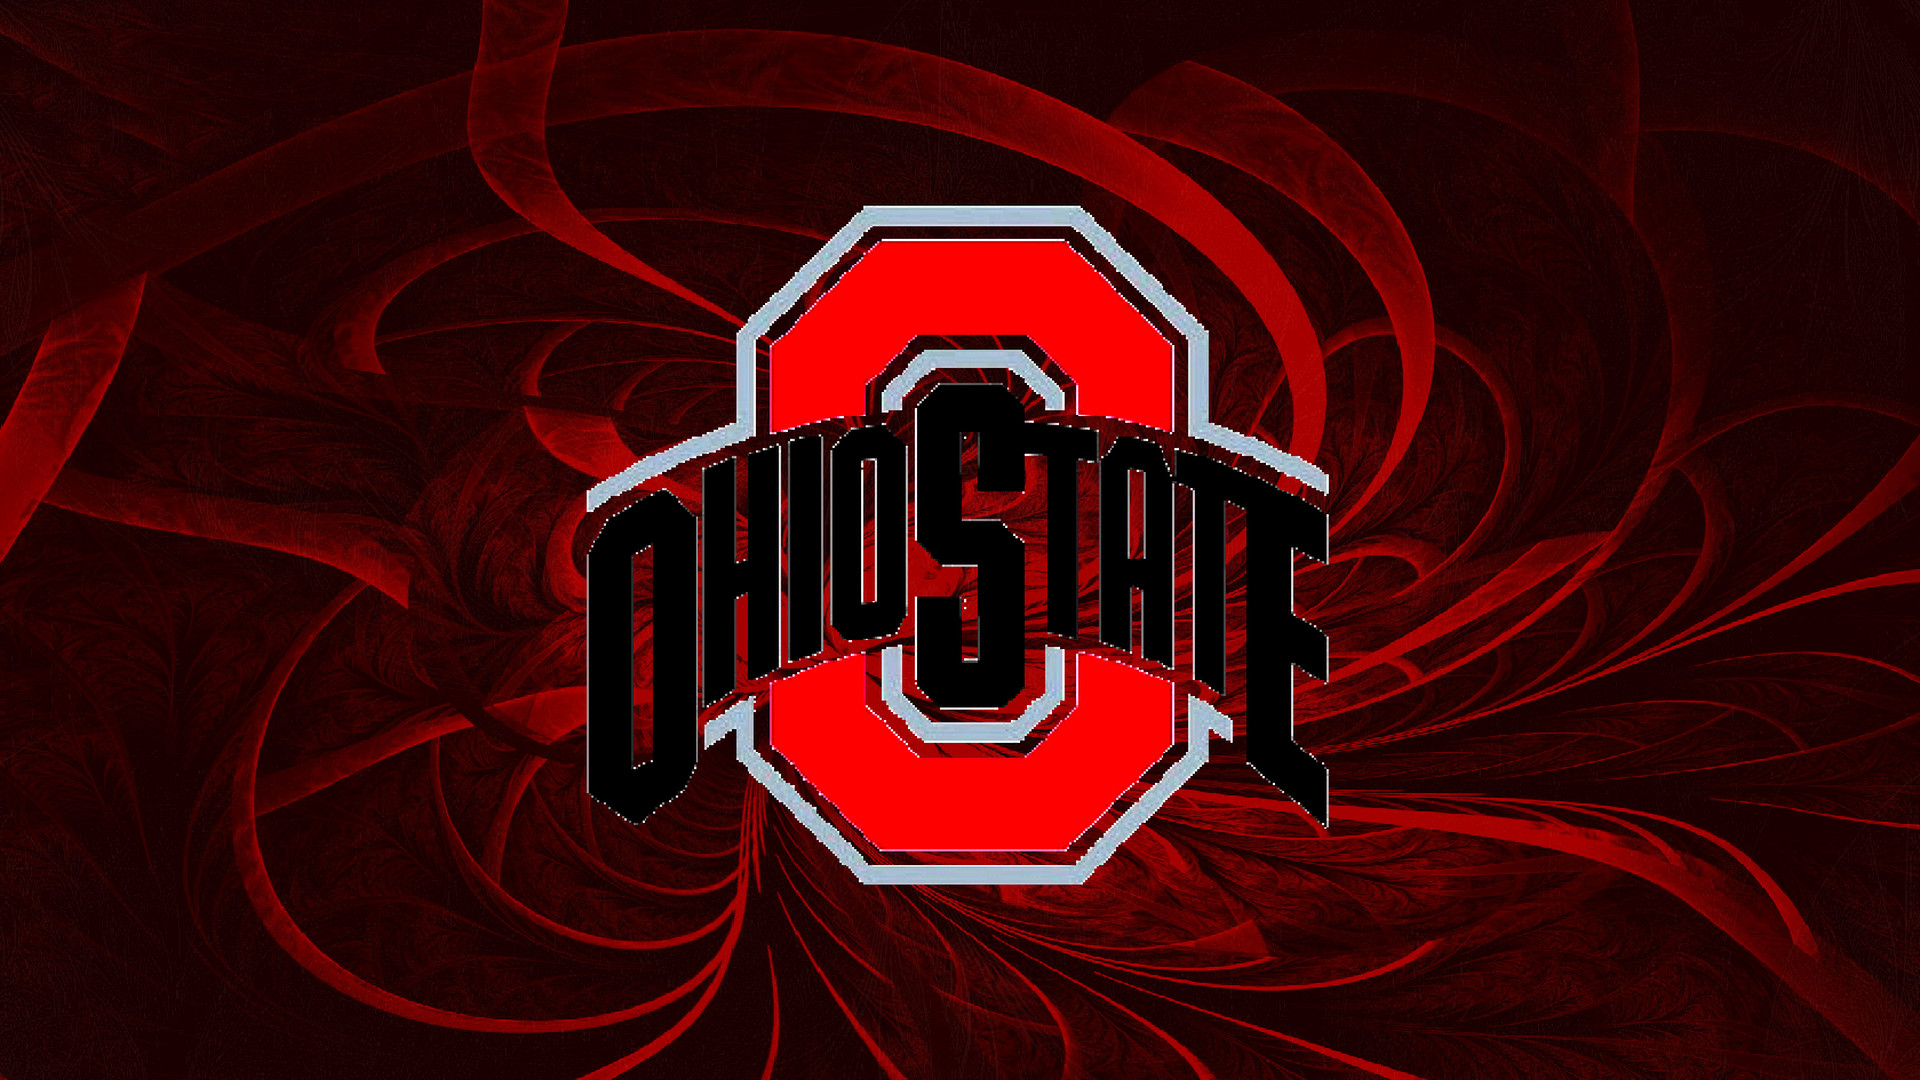 1920x1080 Ohio State Buckeyes images ATHLETIC LOGO #5 HD wallpaper and background  photos